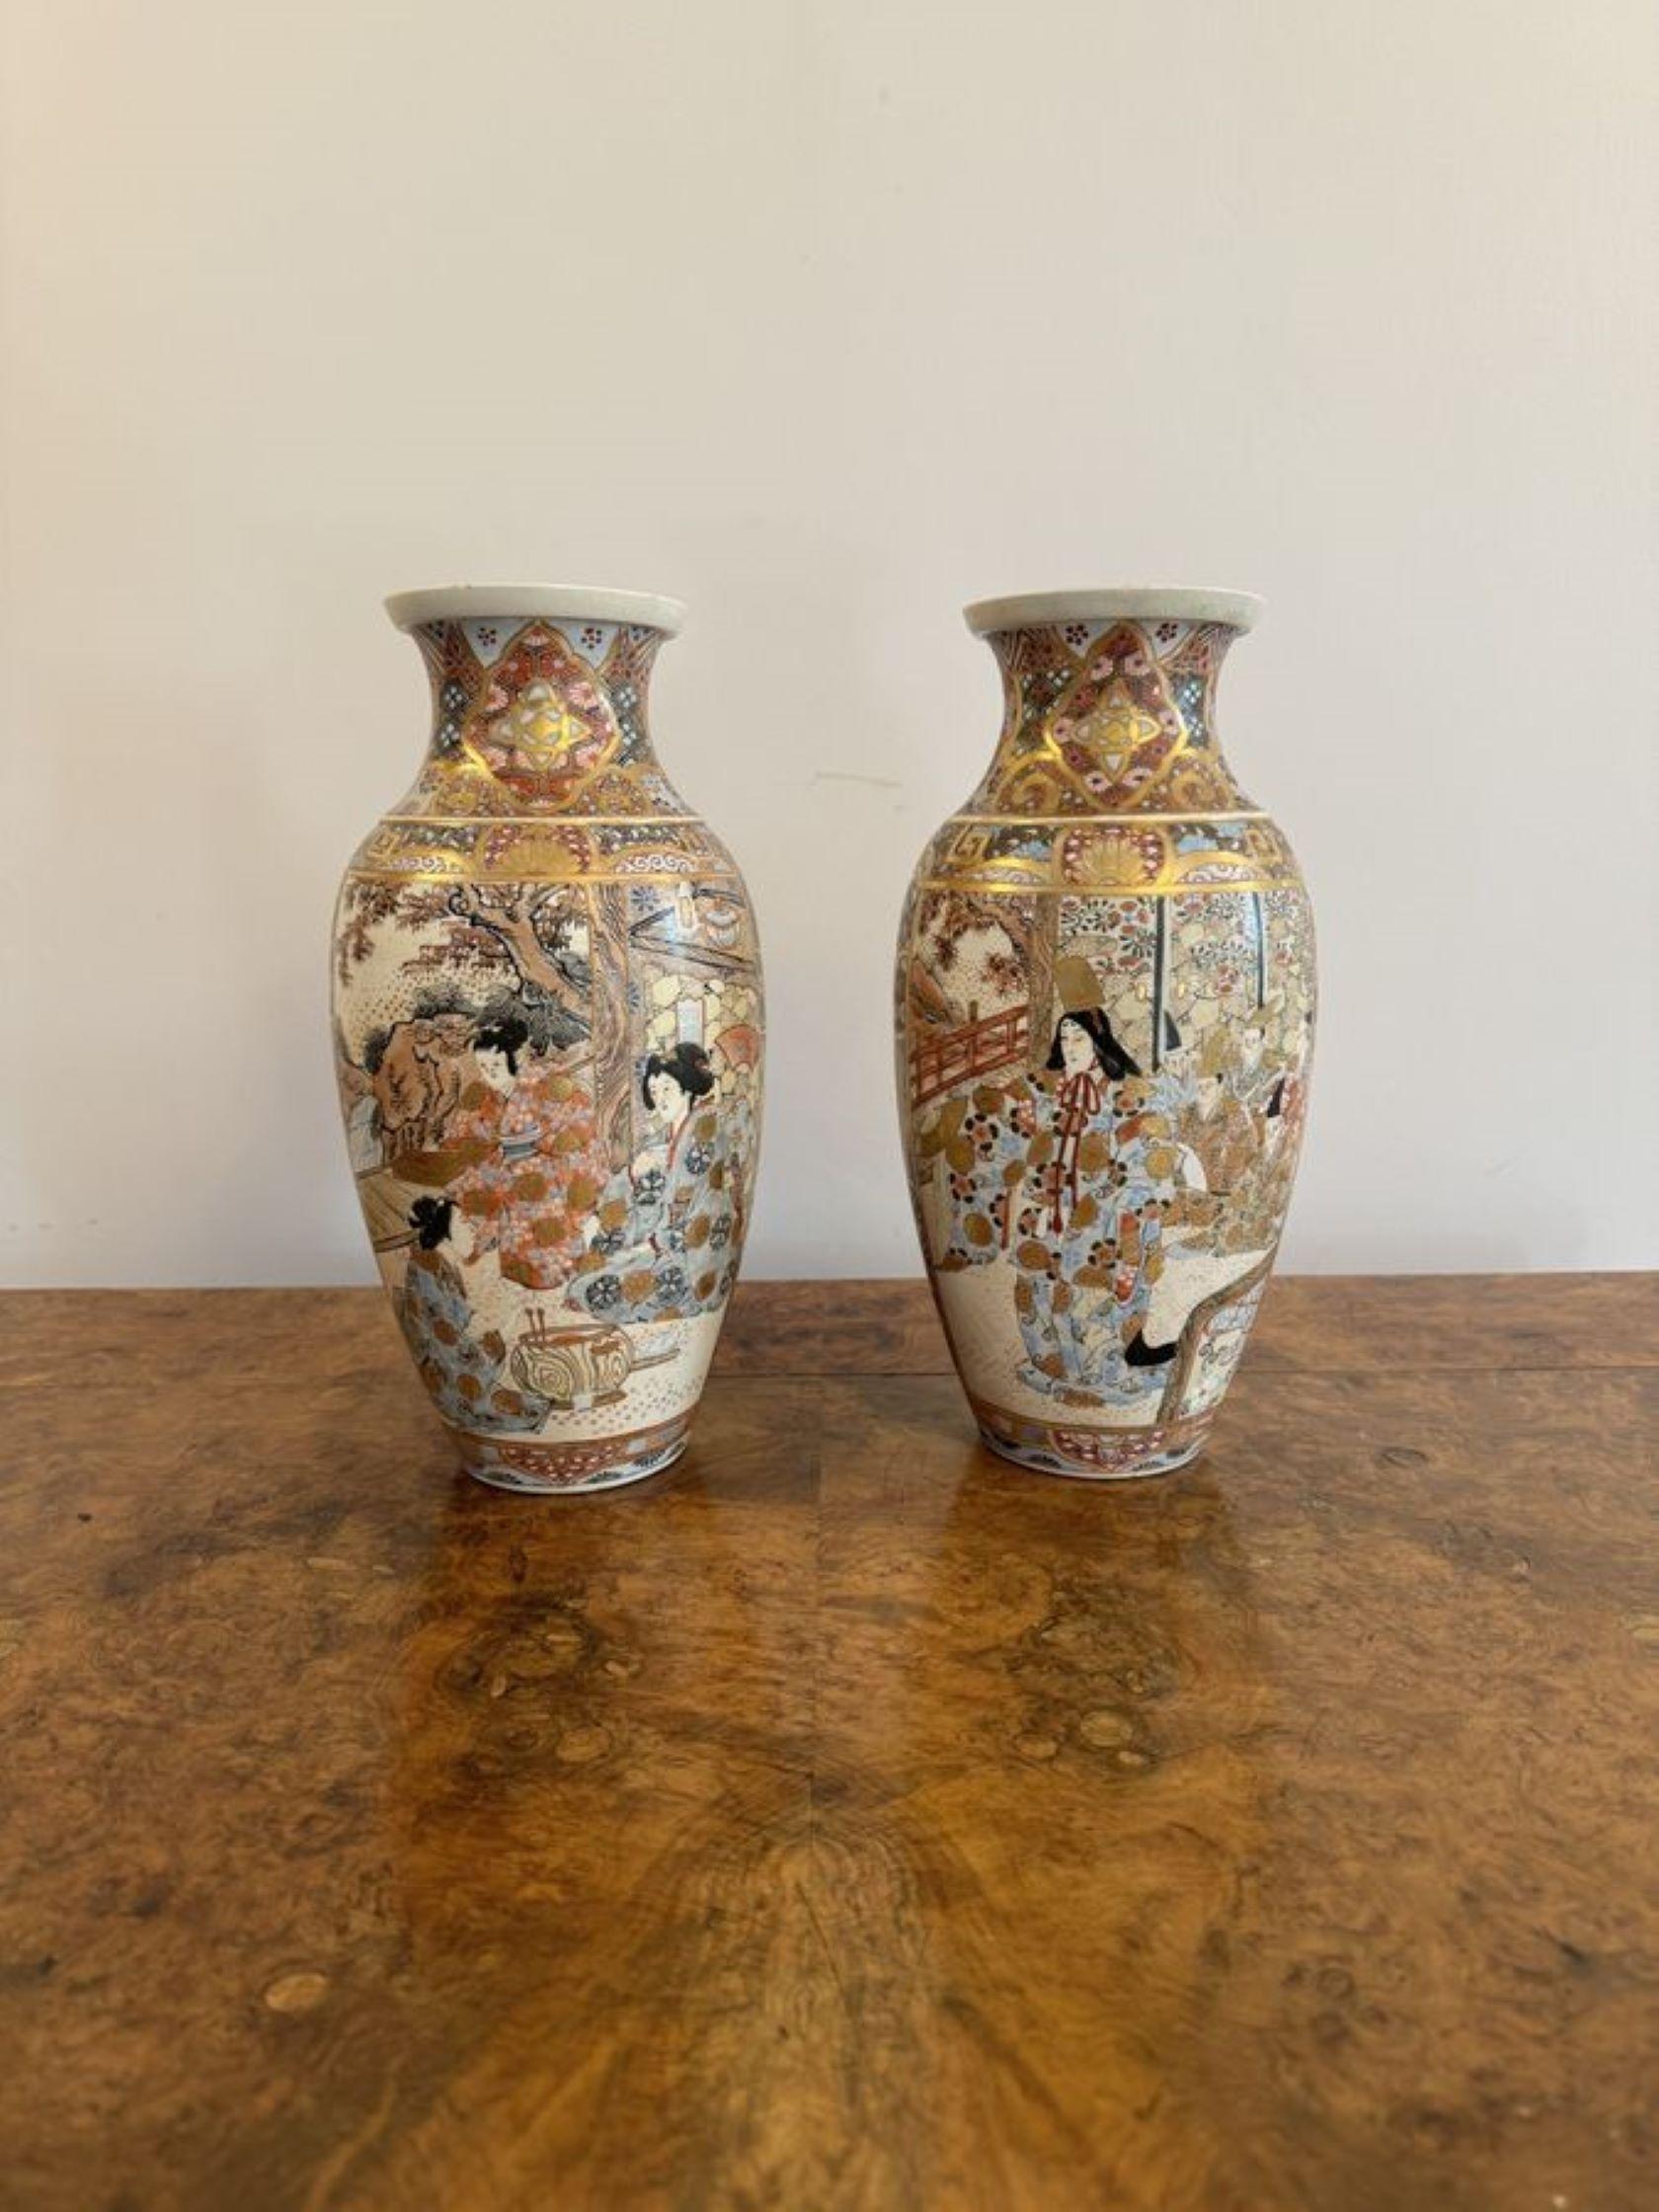 Pair of antique 19th century quality Japanese satsuma vases, having a pair of bulbous shaped quality hand painted vases depicting Japanese life scenes and chrysanthemums in stunning orange, grey, black, red and gold colours.

D. 1880